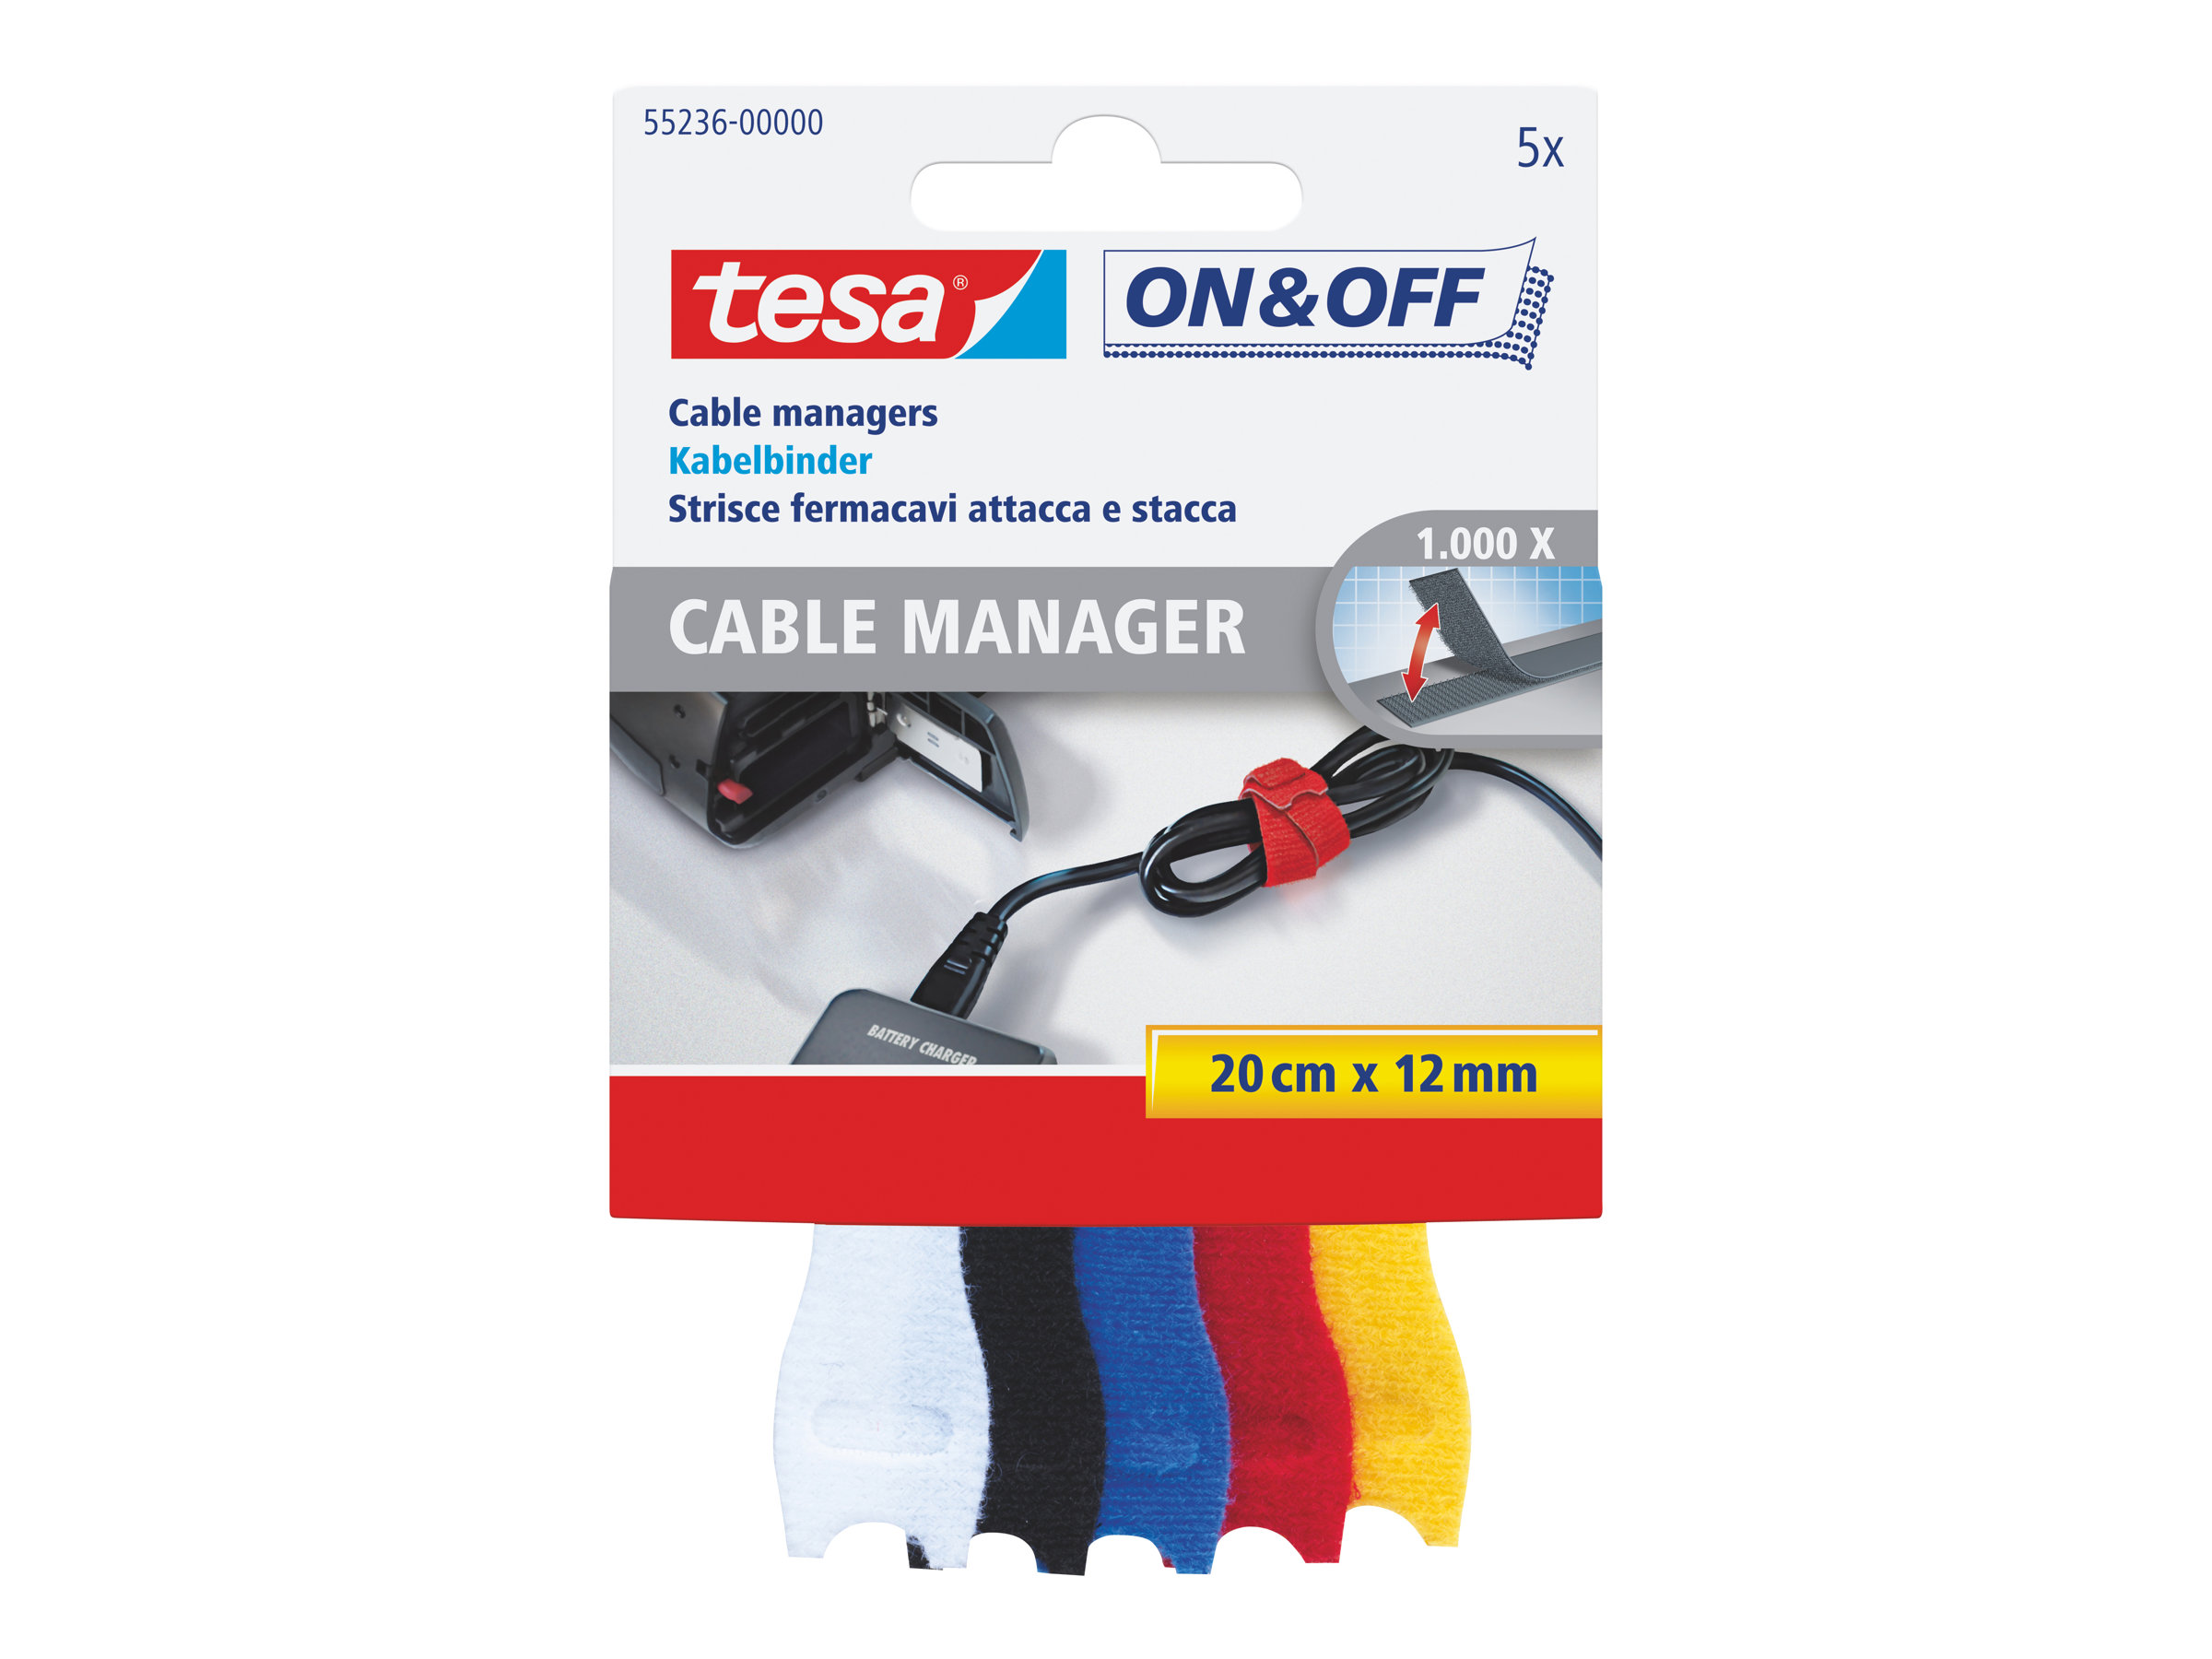 Tesa 55239 - Cable Manager - On & Off - Kabelbinder - 20 cm x 12 mm